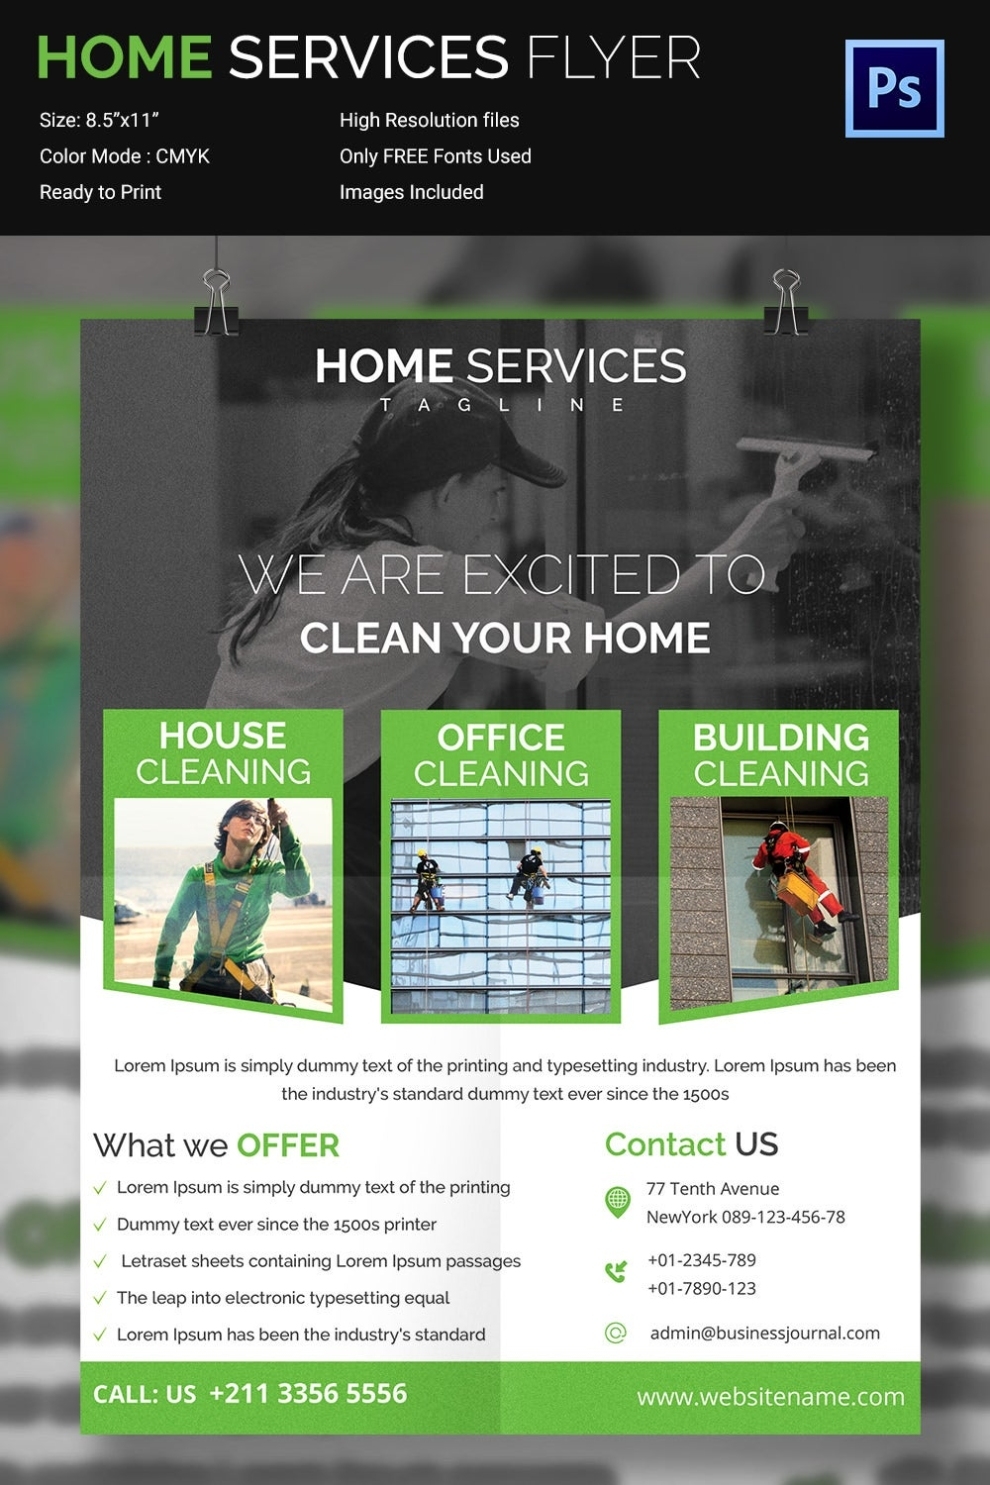 House Cleaning Flyer Template - 23+ Psd Format Download | Free Within House Cleaning Services Flyer Templates